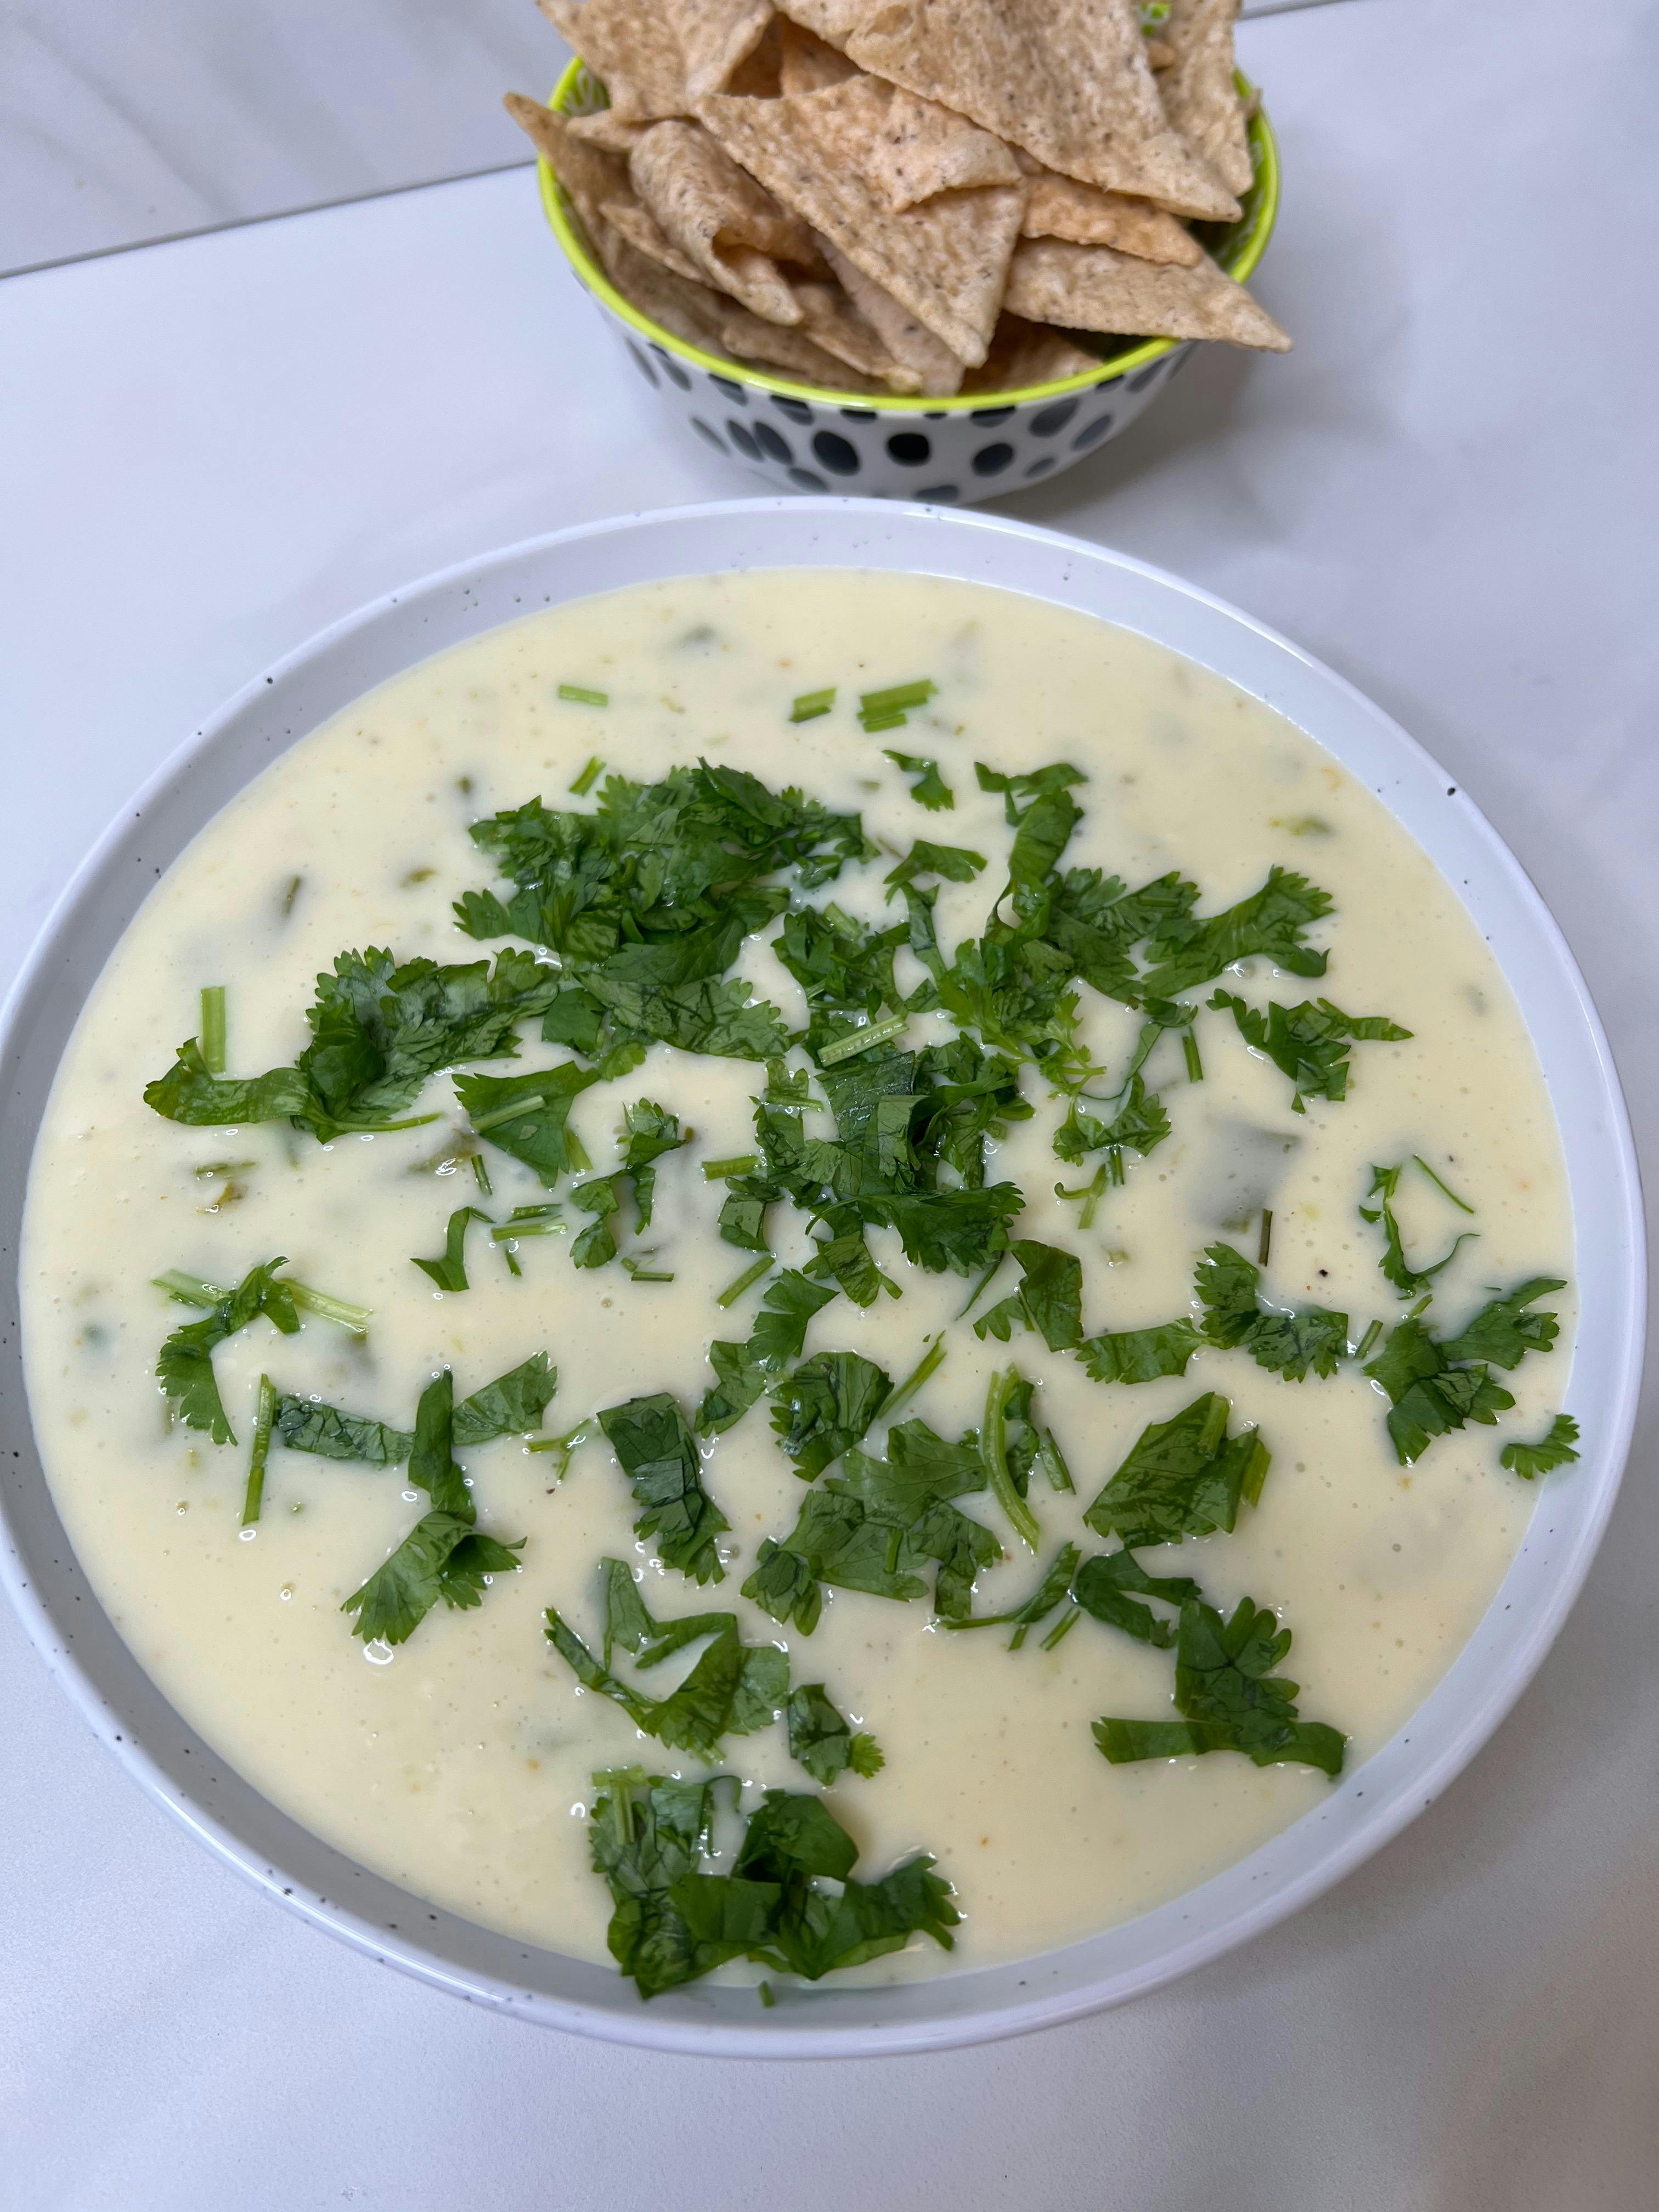 Picture for Hatch Chile Queso